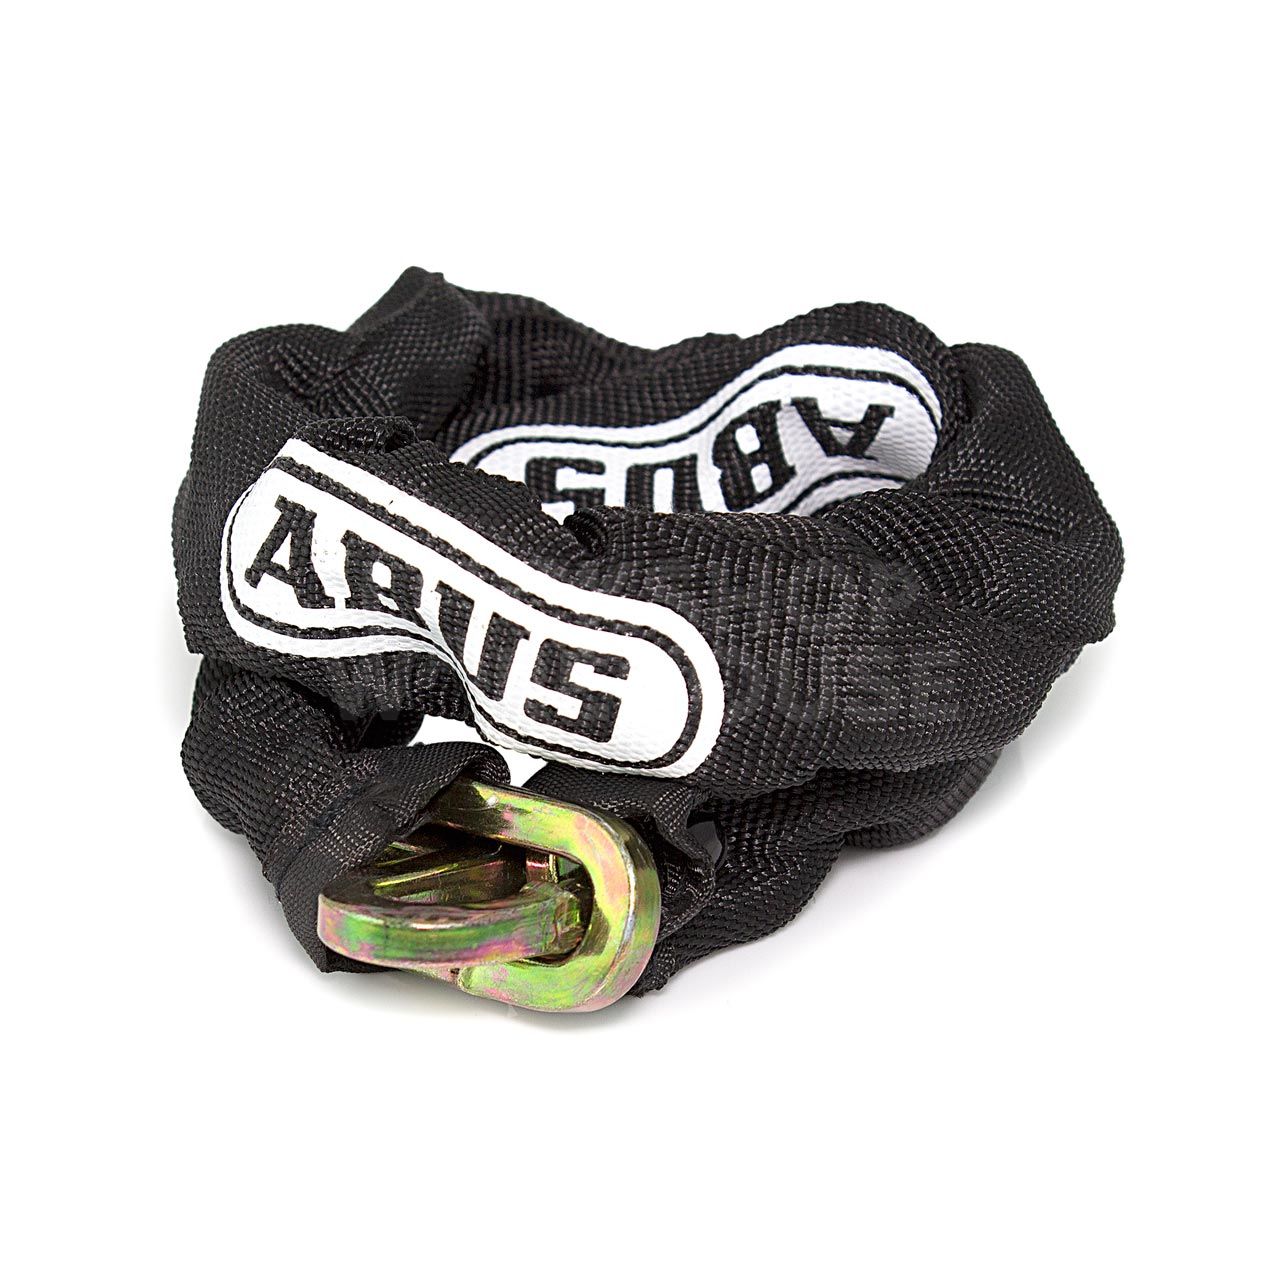 ABUS 6KS 6mm Square Link Security Chain